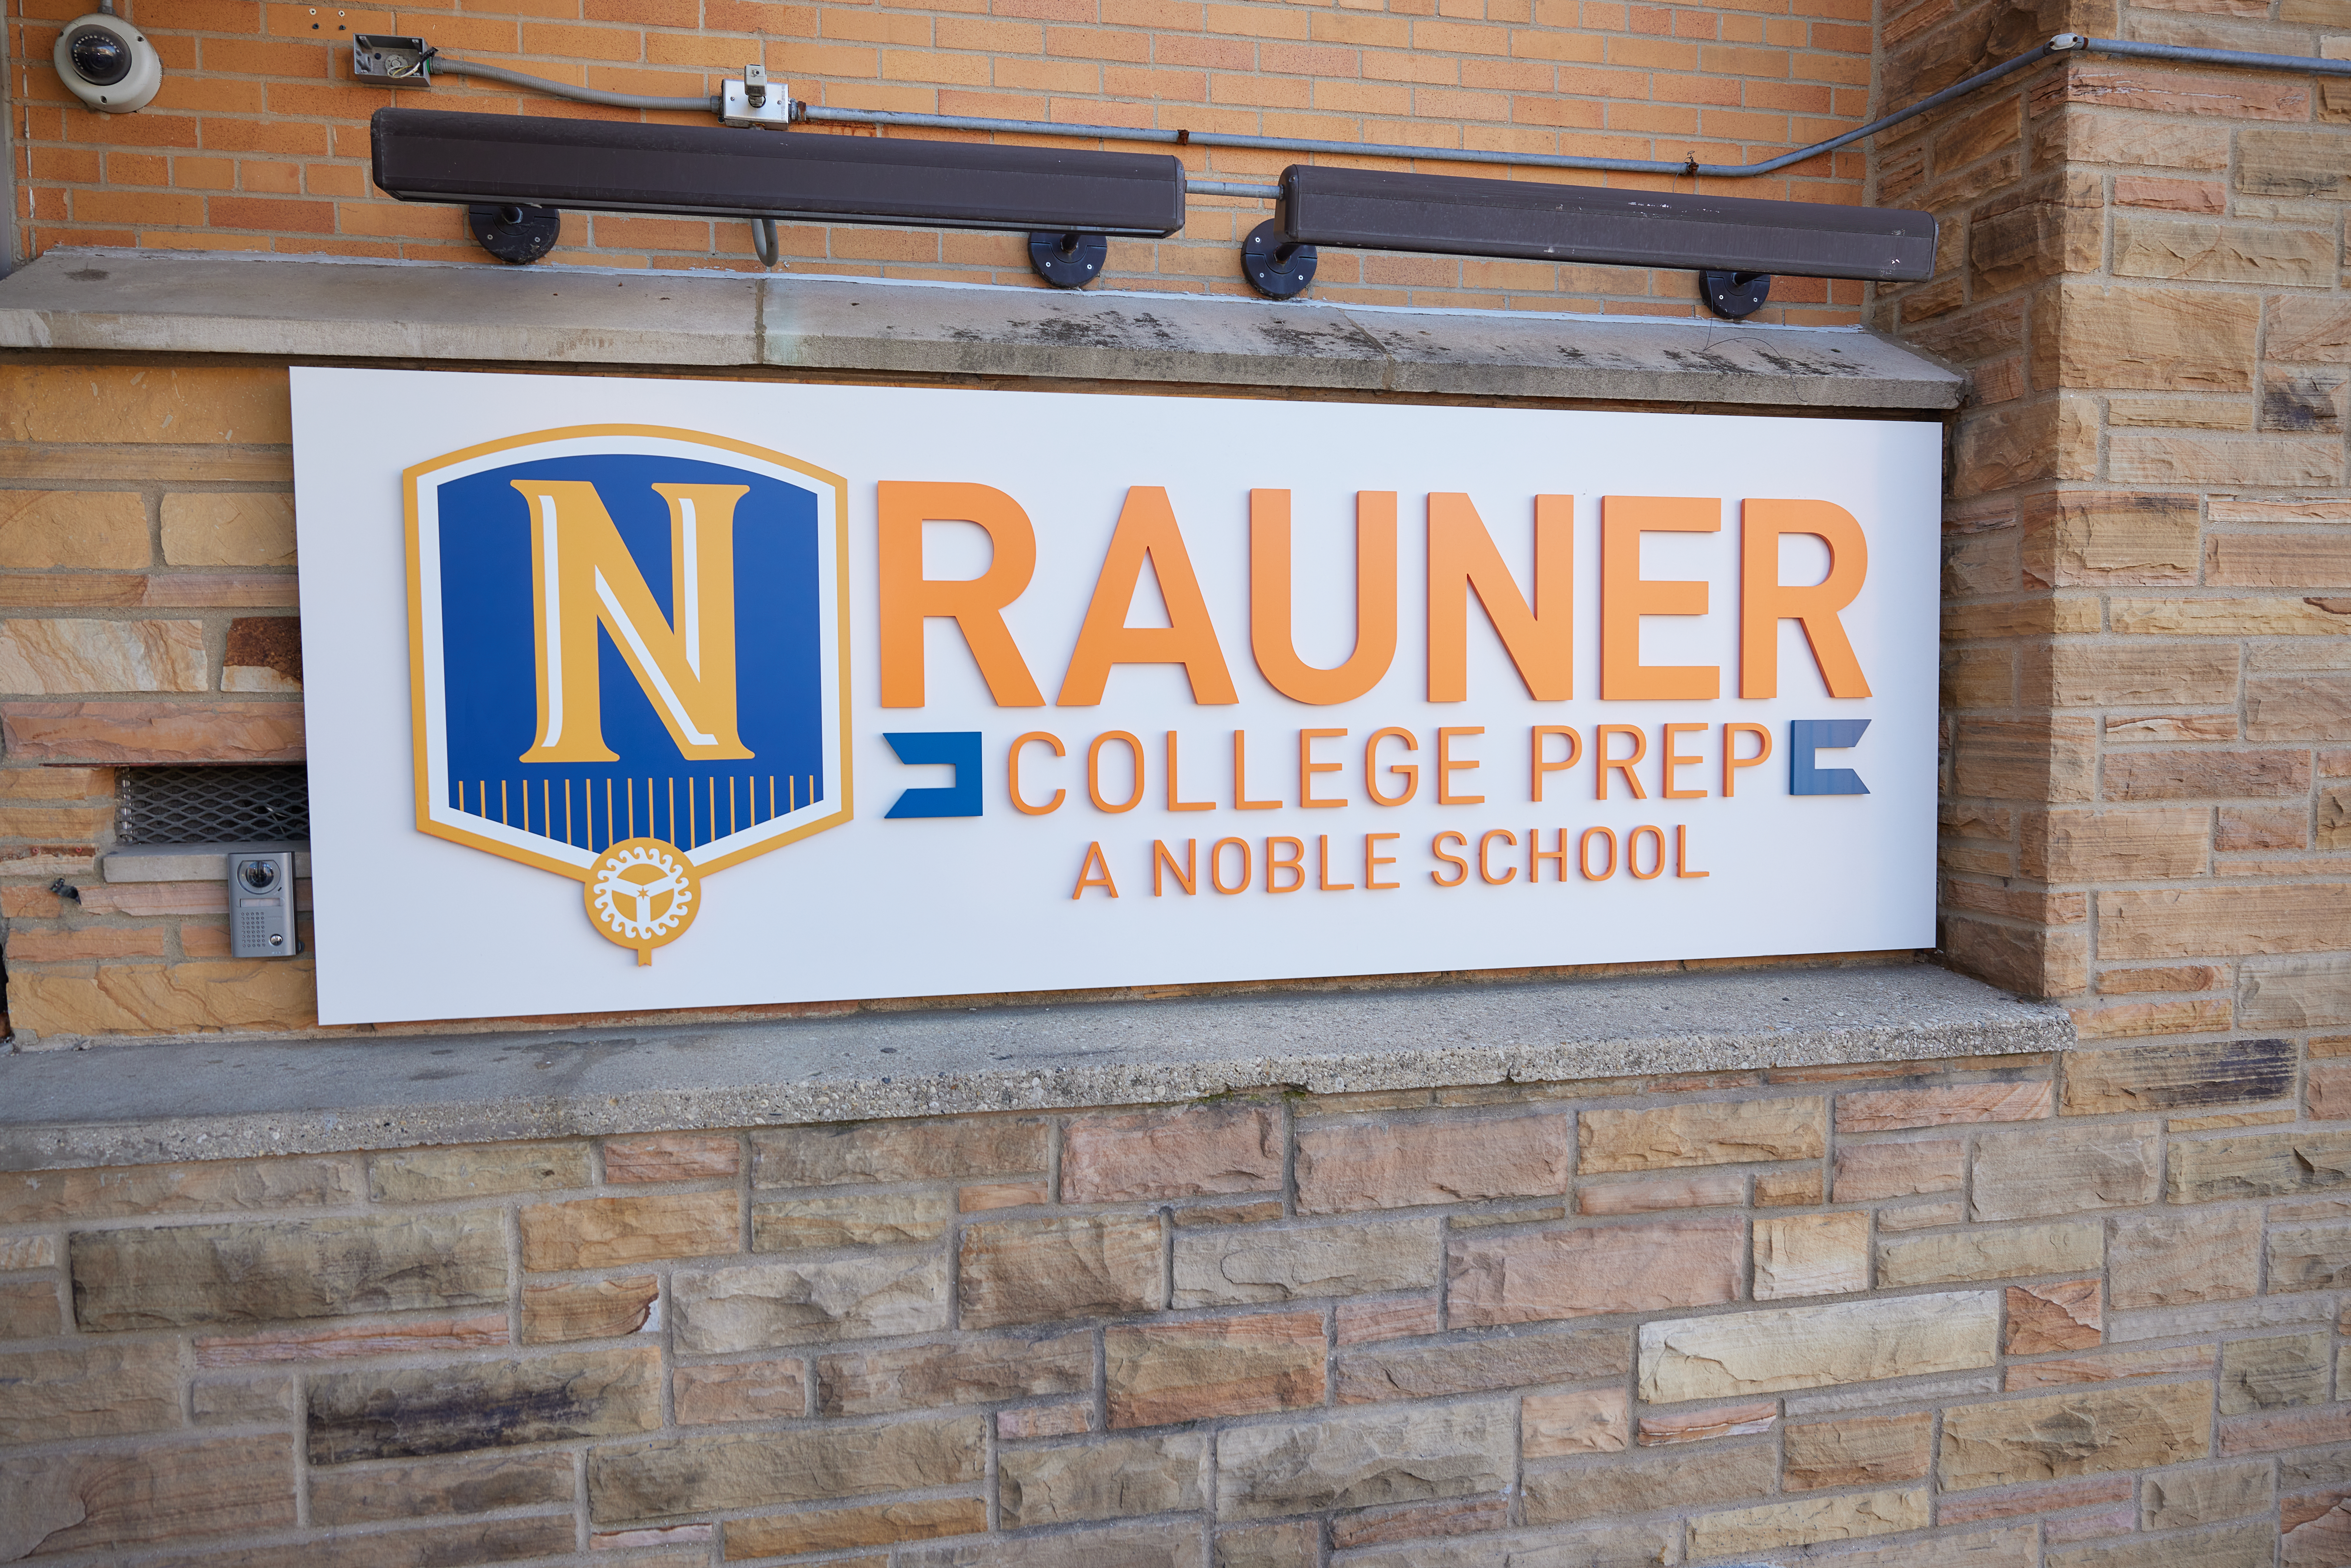 sign that reads "RAUNER COLLEGE PREP"